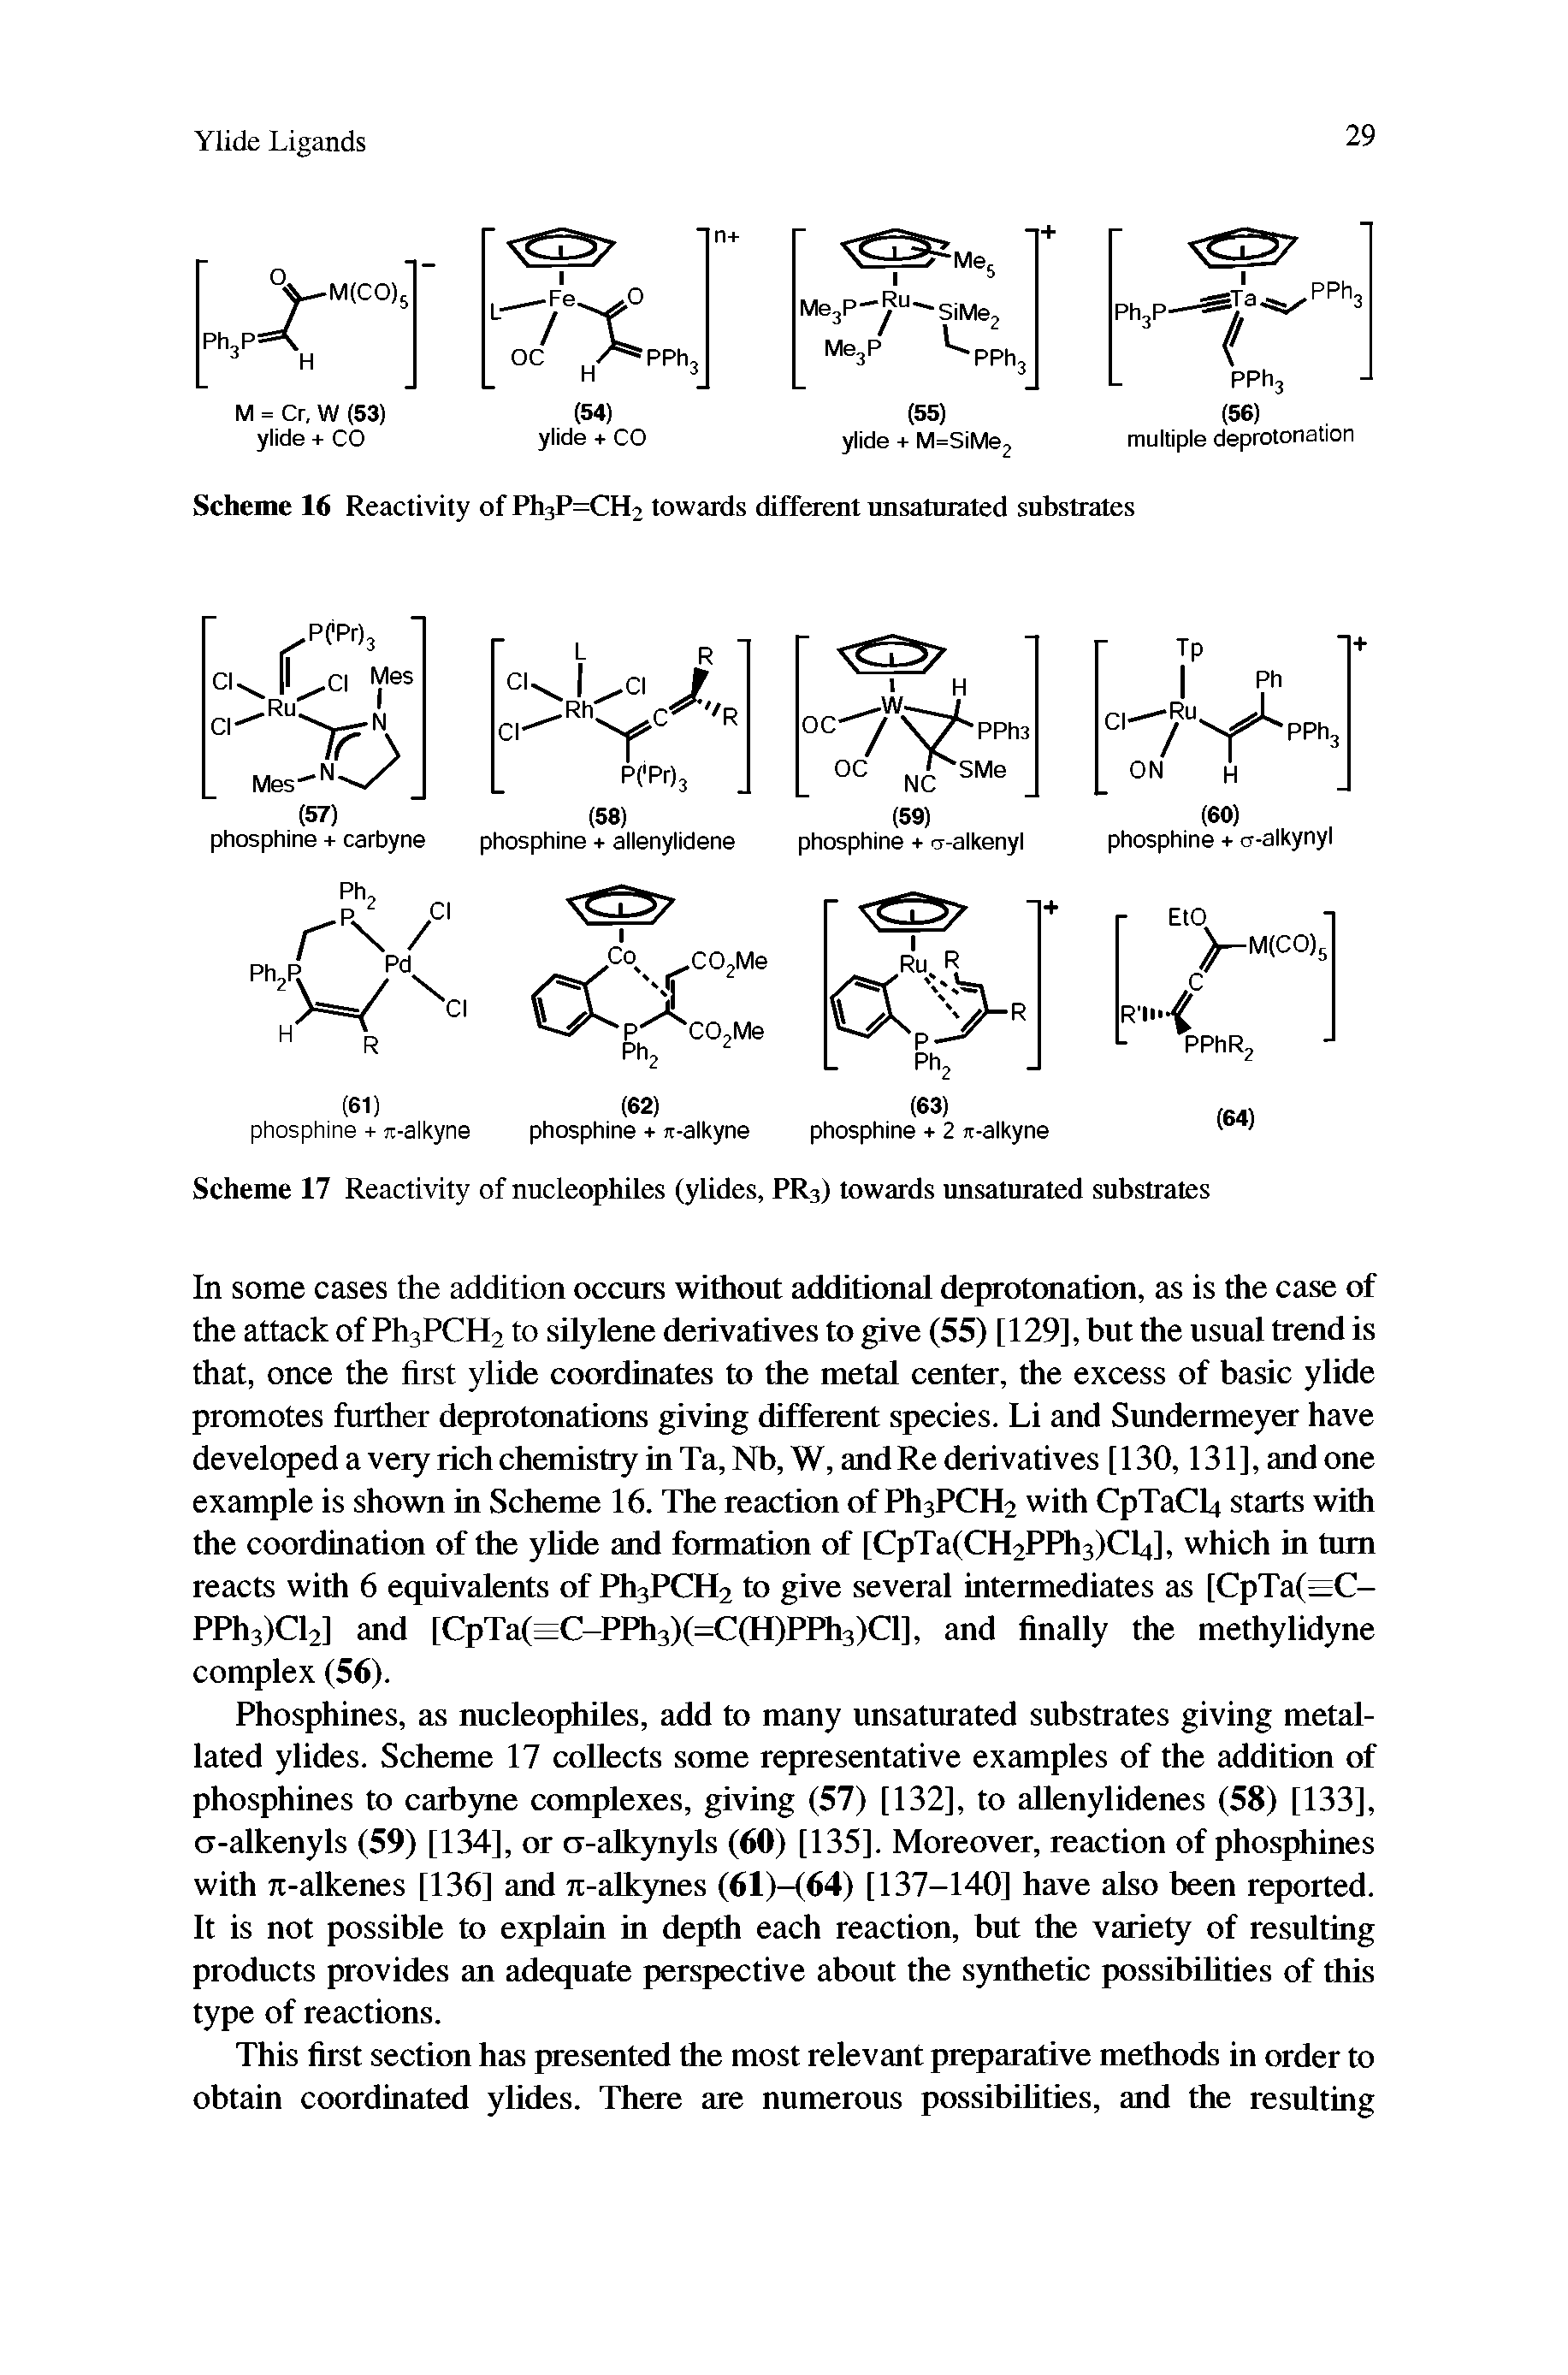 Scheme 17 Reactivity of nucleophiles (ylides, PR3) towards unsaturated substrates...